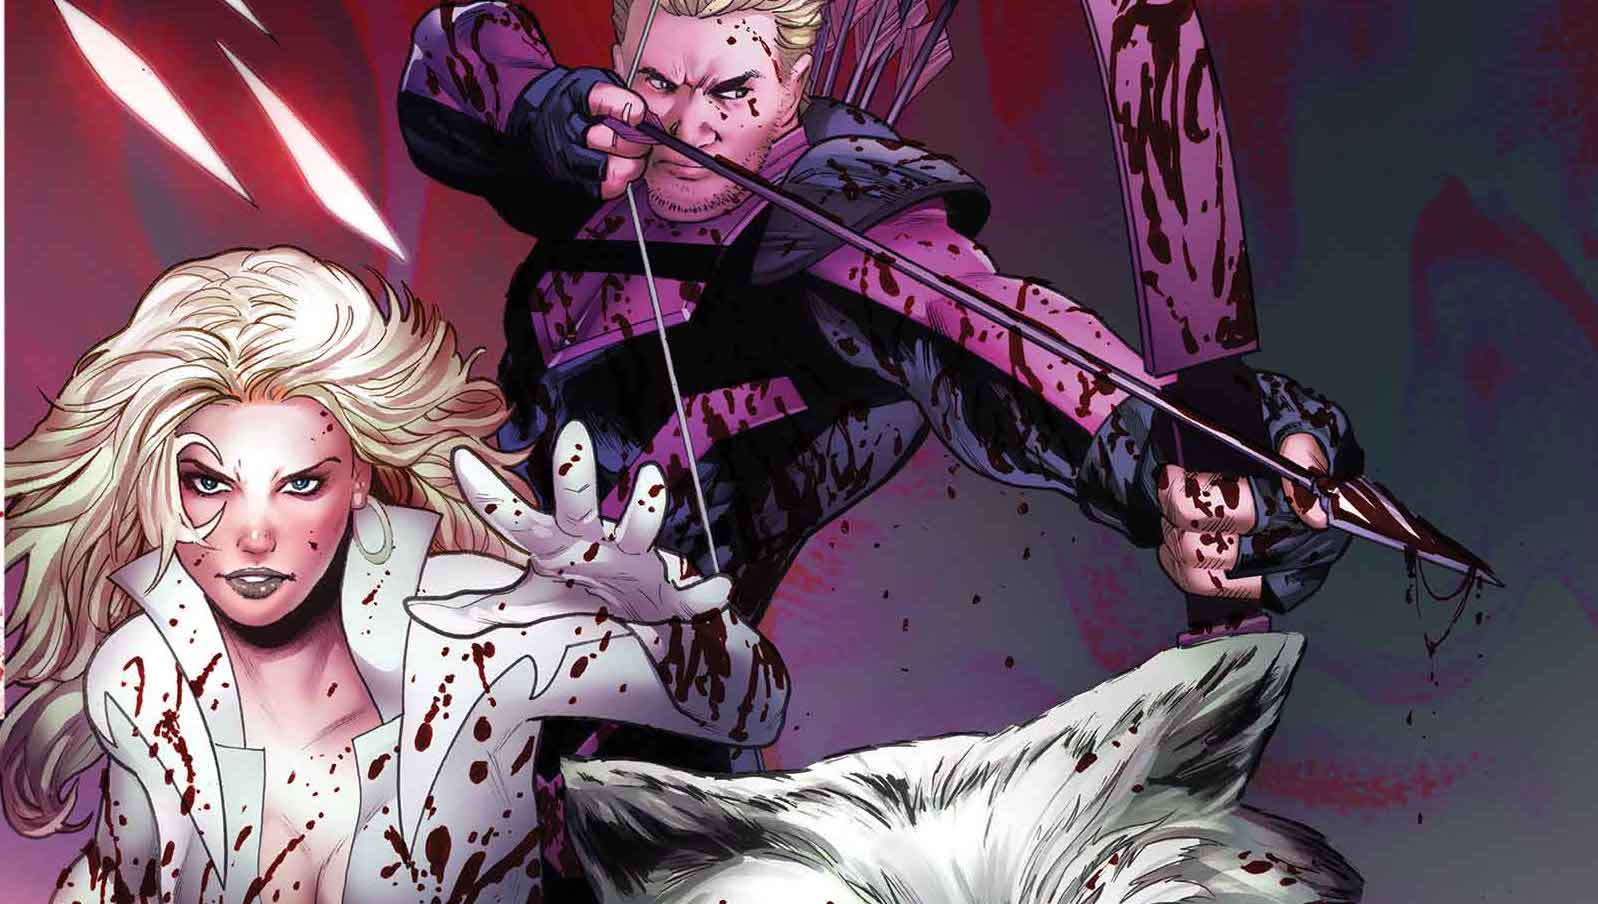 'Blood Hunt' anthology series 'Blood Hunters' #1 coming this May